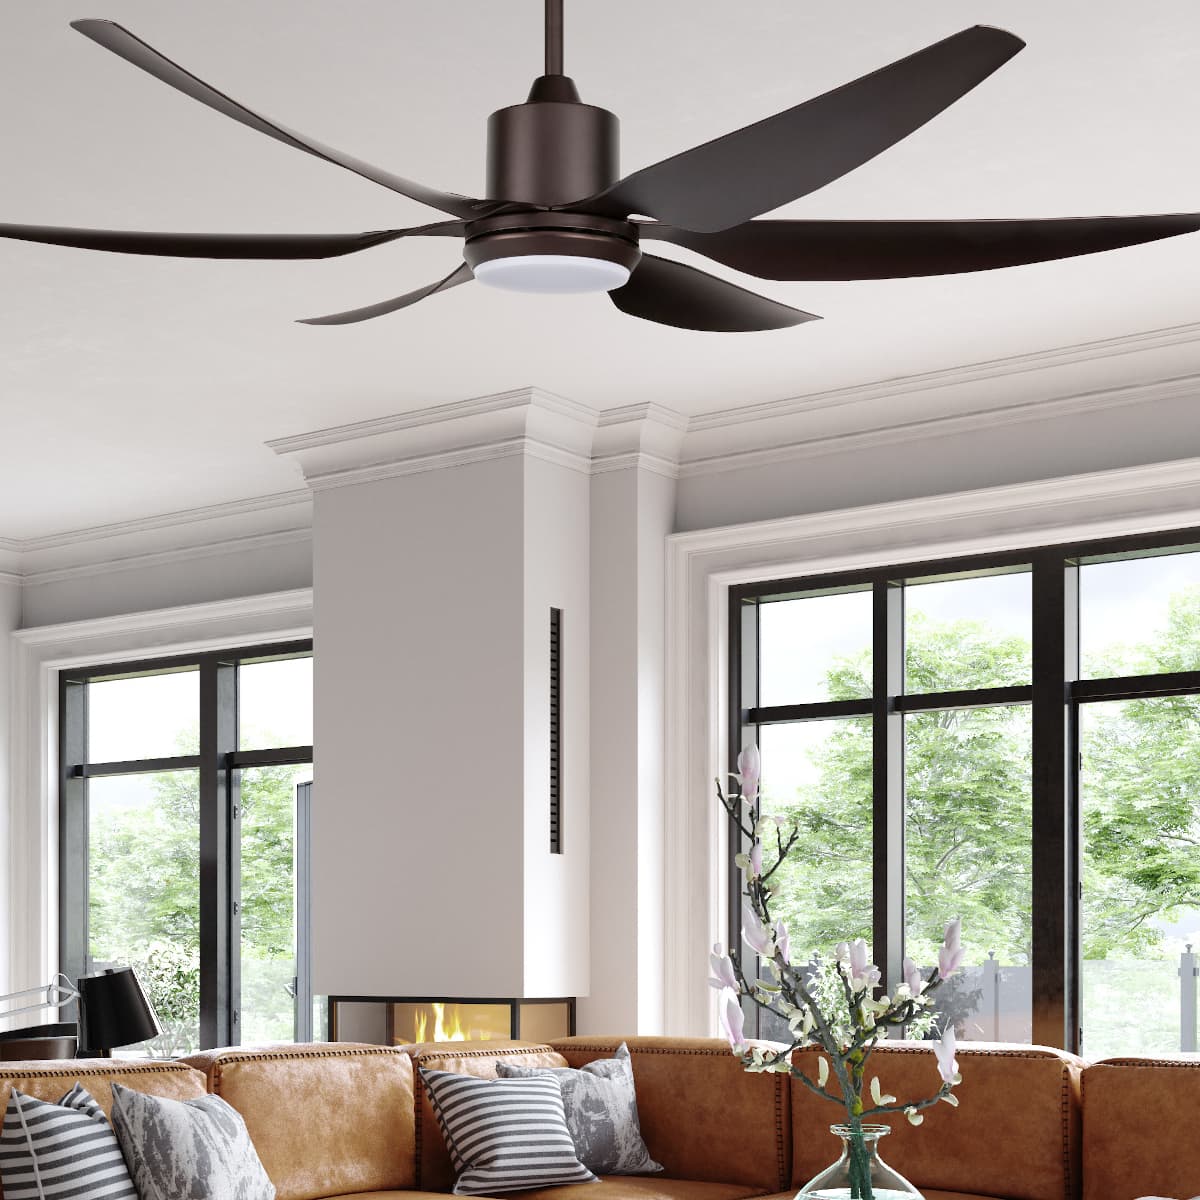 Aviator 6 Blade Fan with Light in a lounge with leather couches